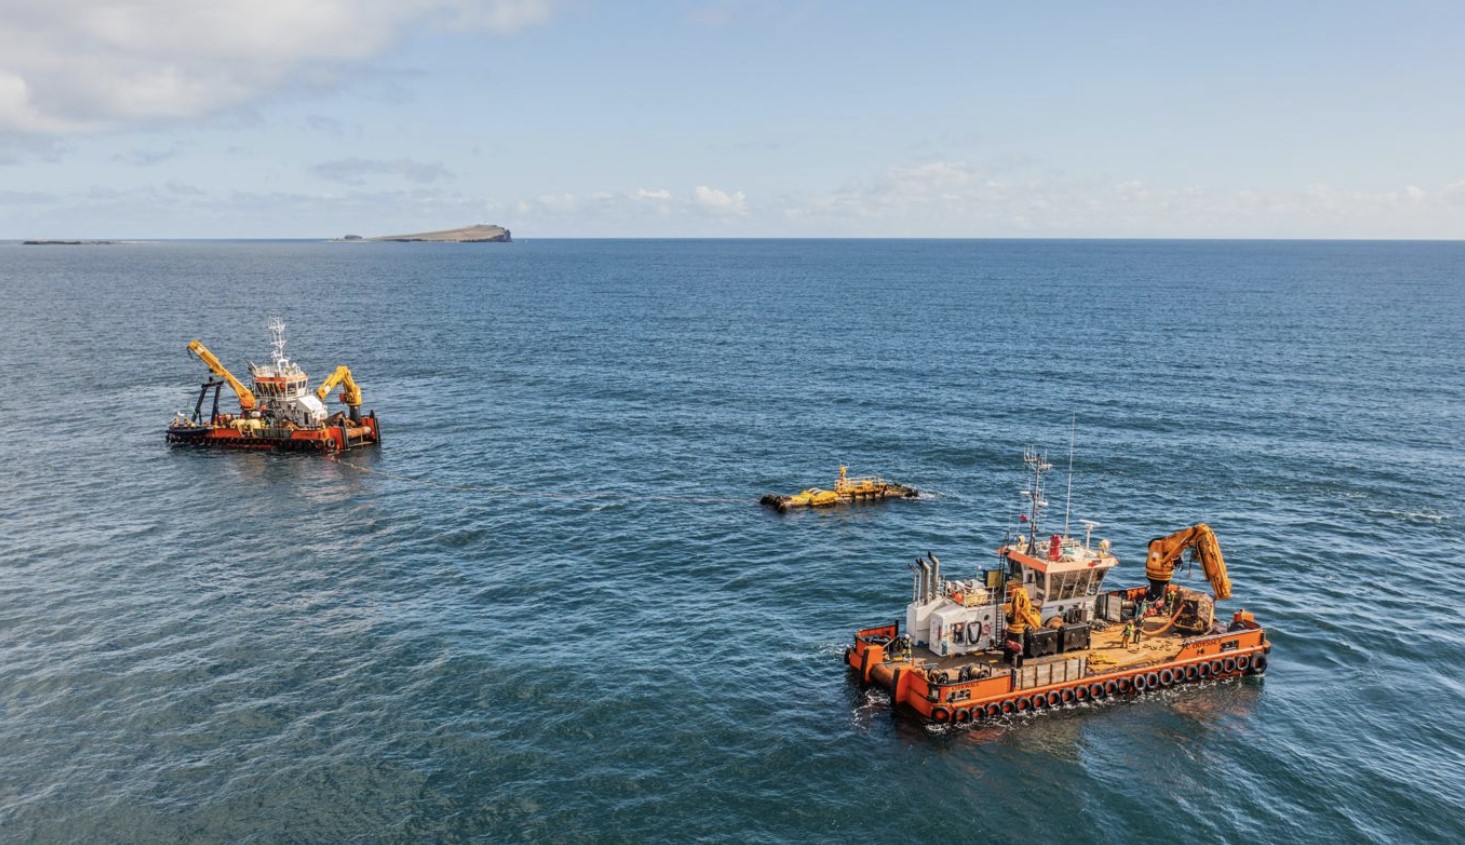 Mocean Energy's wave energy converter back to shore after 12-month offshore testing